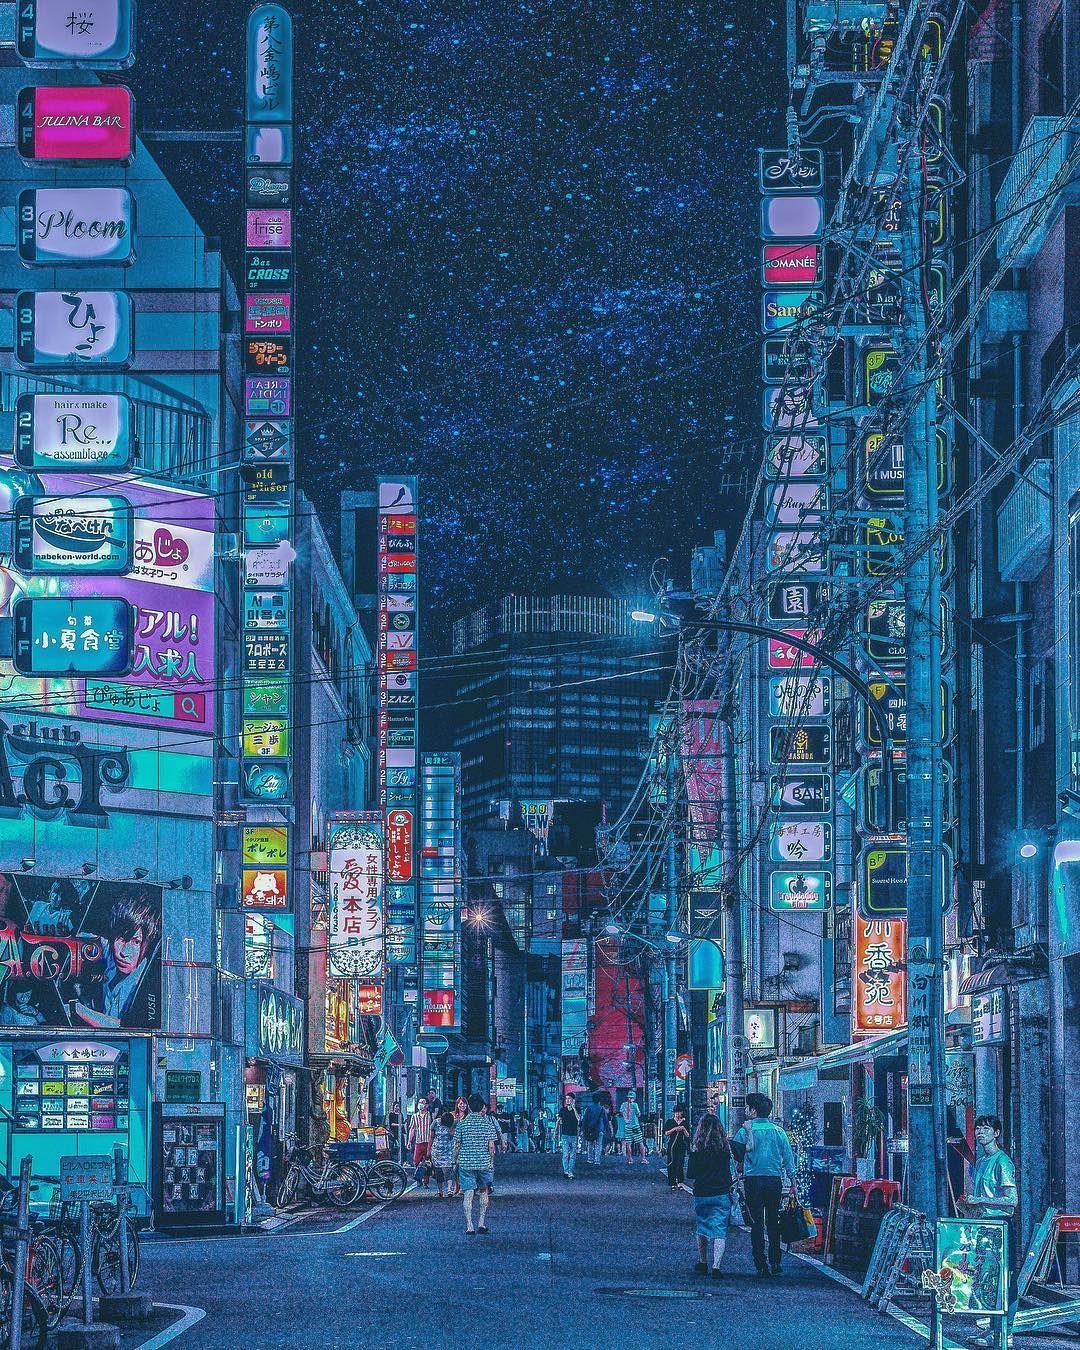 Nightlife in Tokyo's Streets by Yoshito Hasaka. Aesthetic